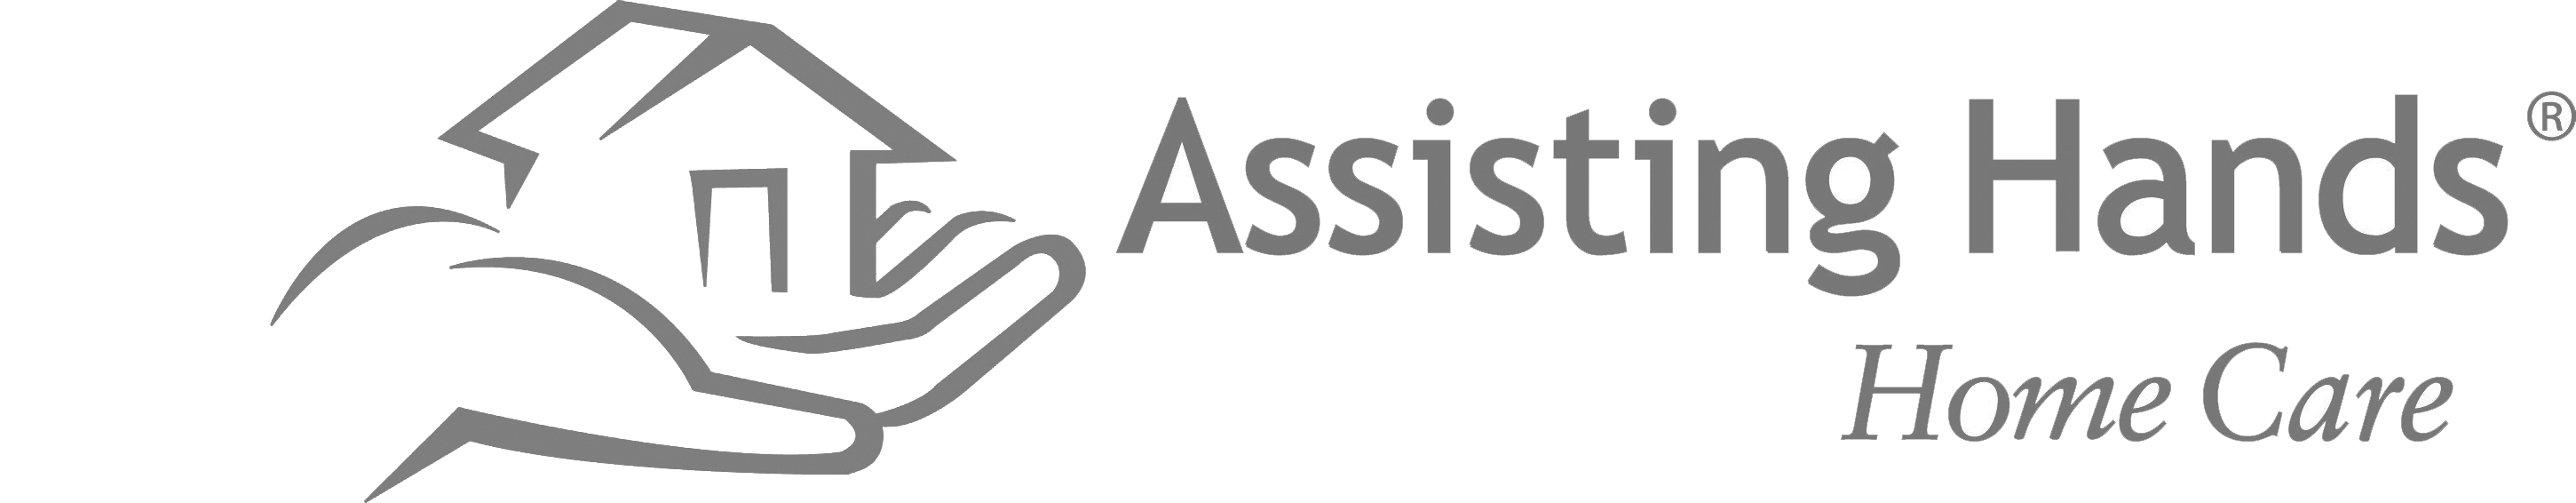 Assisting-Hands-Logo-bw.png